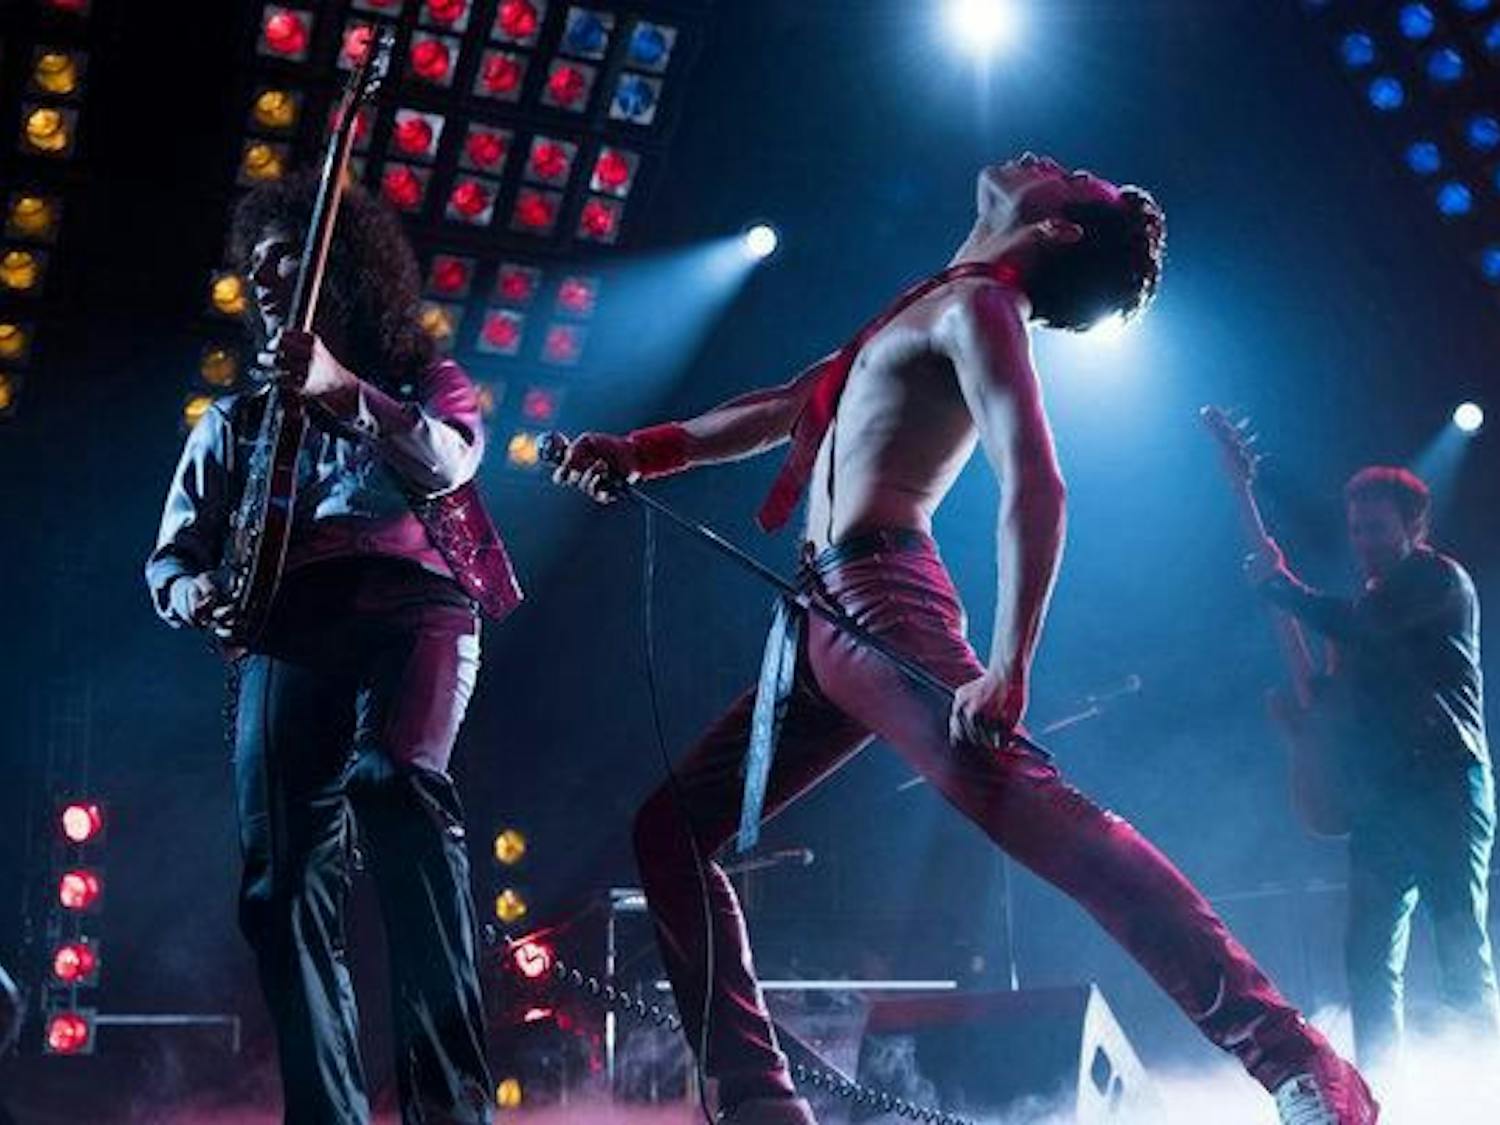 Bohemian Rhapsody&nbsp;attempts to share the story of the life of music legend and frontman to music group Queen, Freddie Mercury.